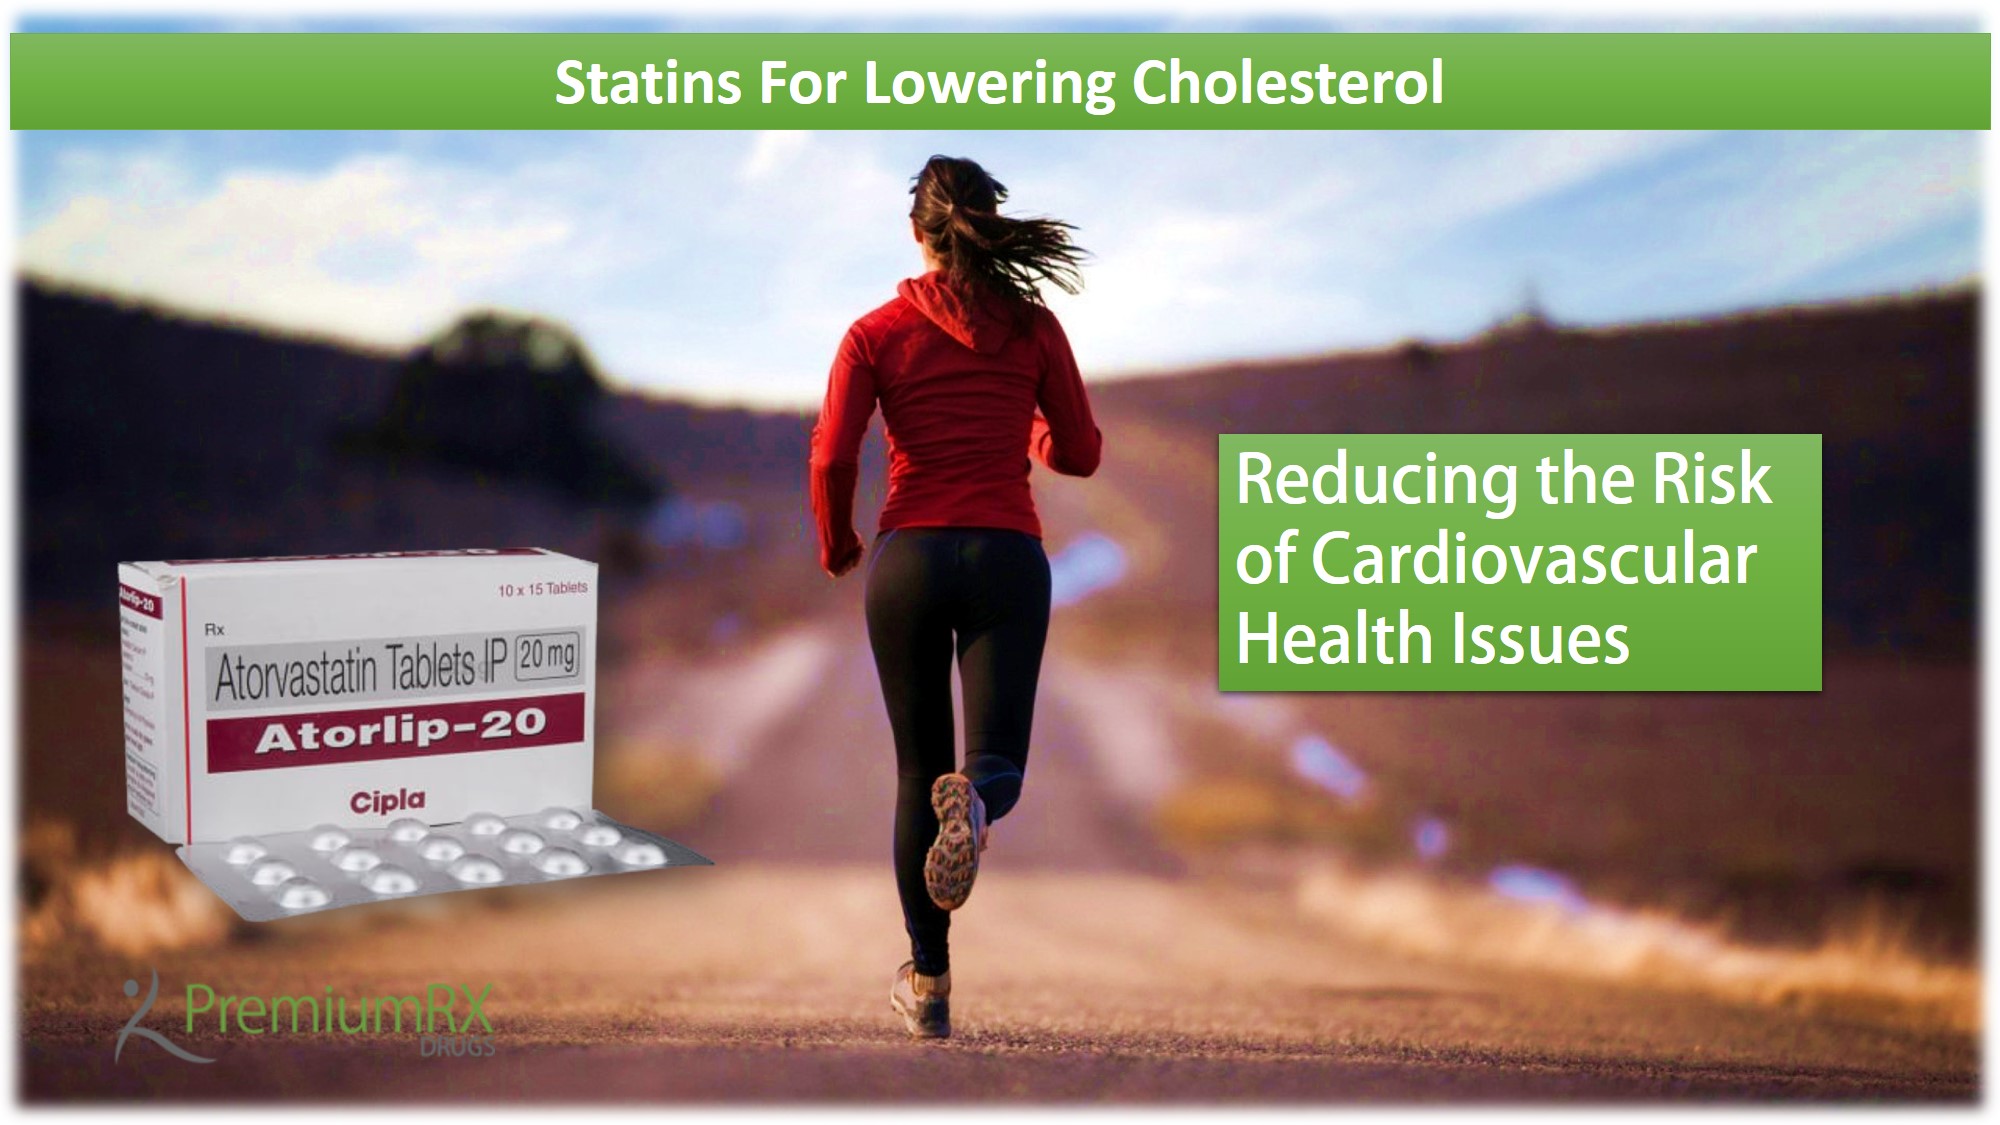 Alternatives to Statins For Lowering Cholesterol